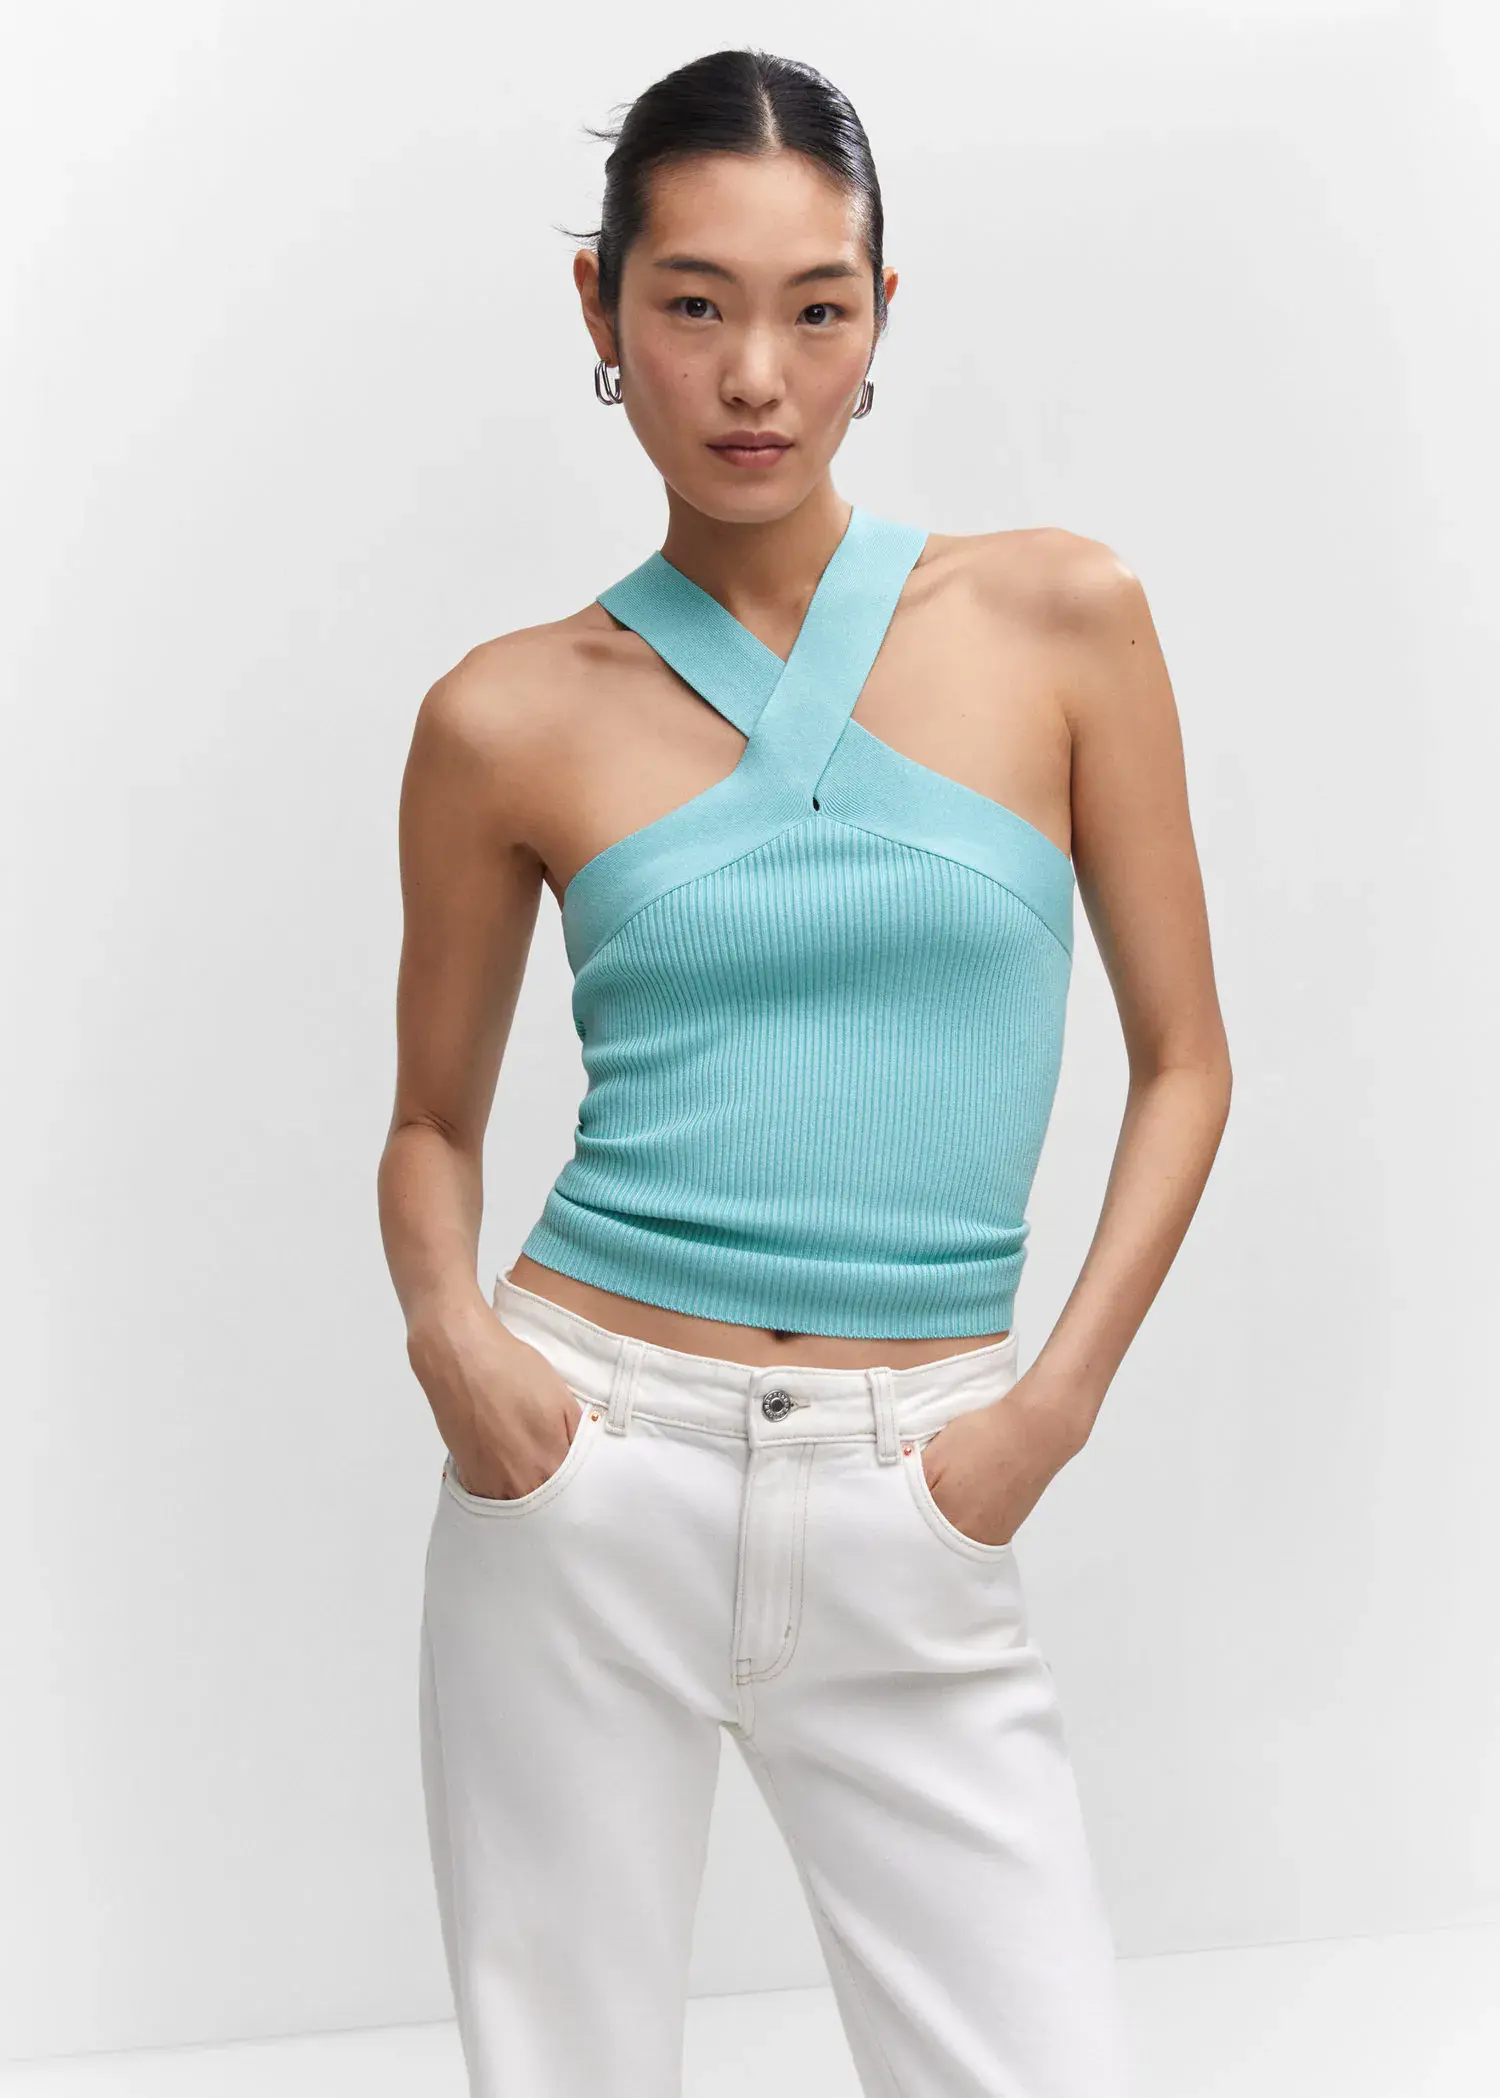 Mango Halter-neck knitted top. a woman wearing white pants and a blue halter top. 